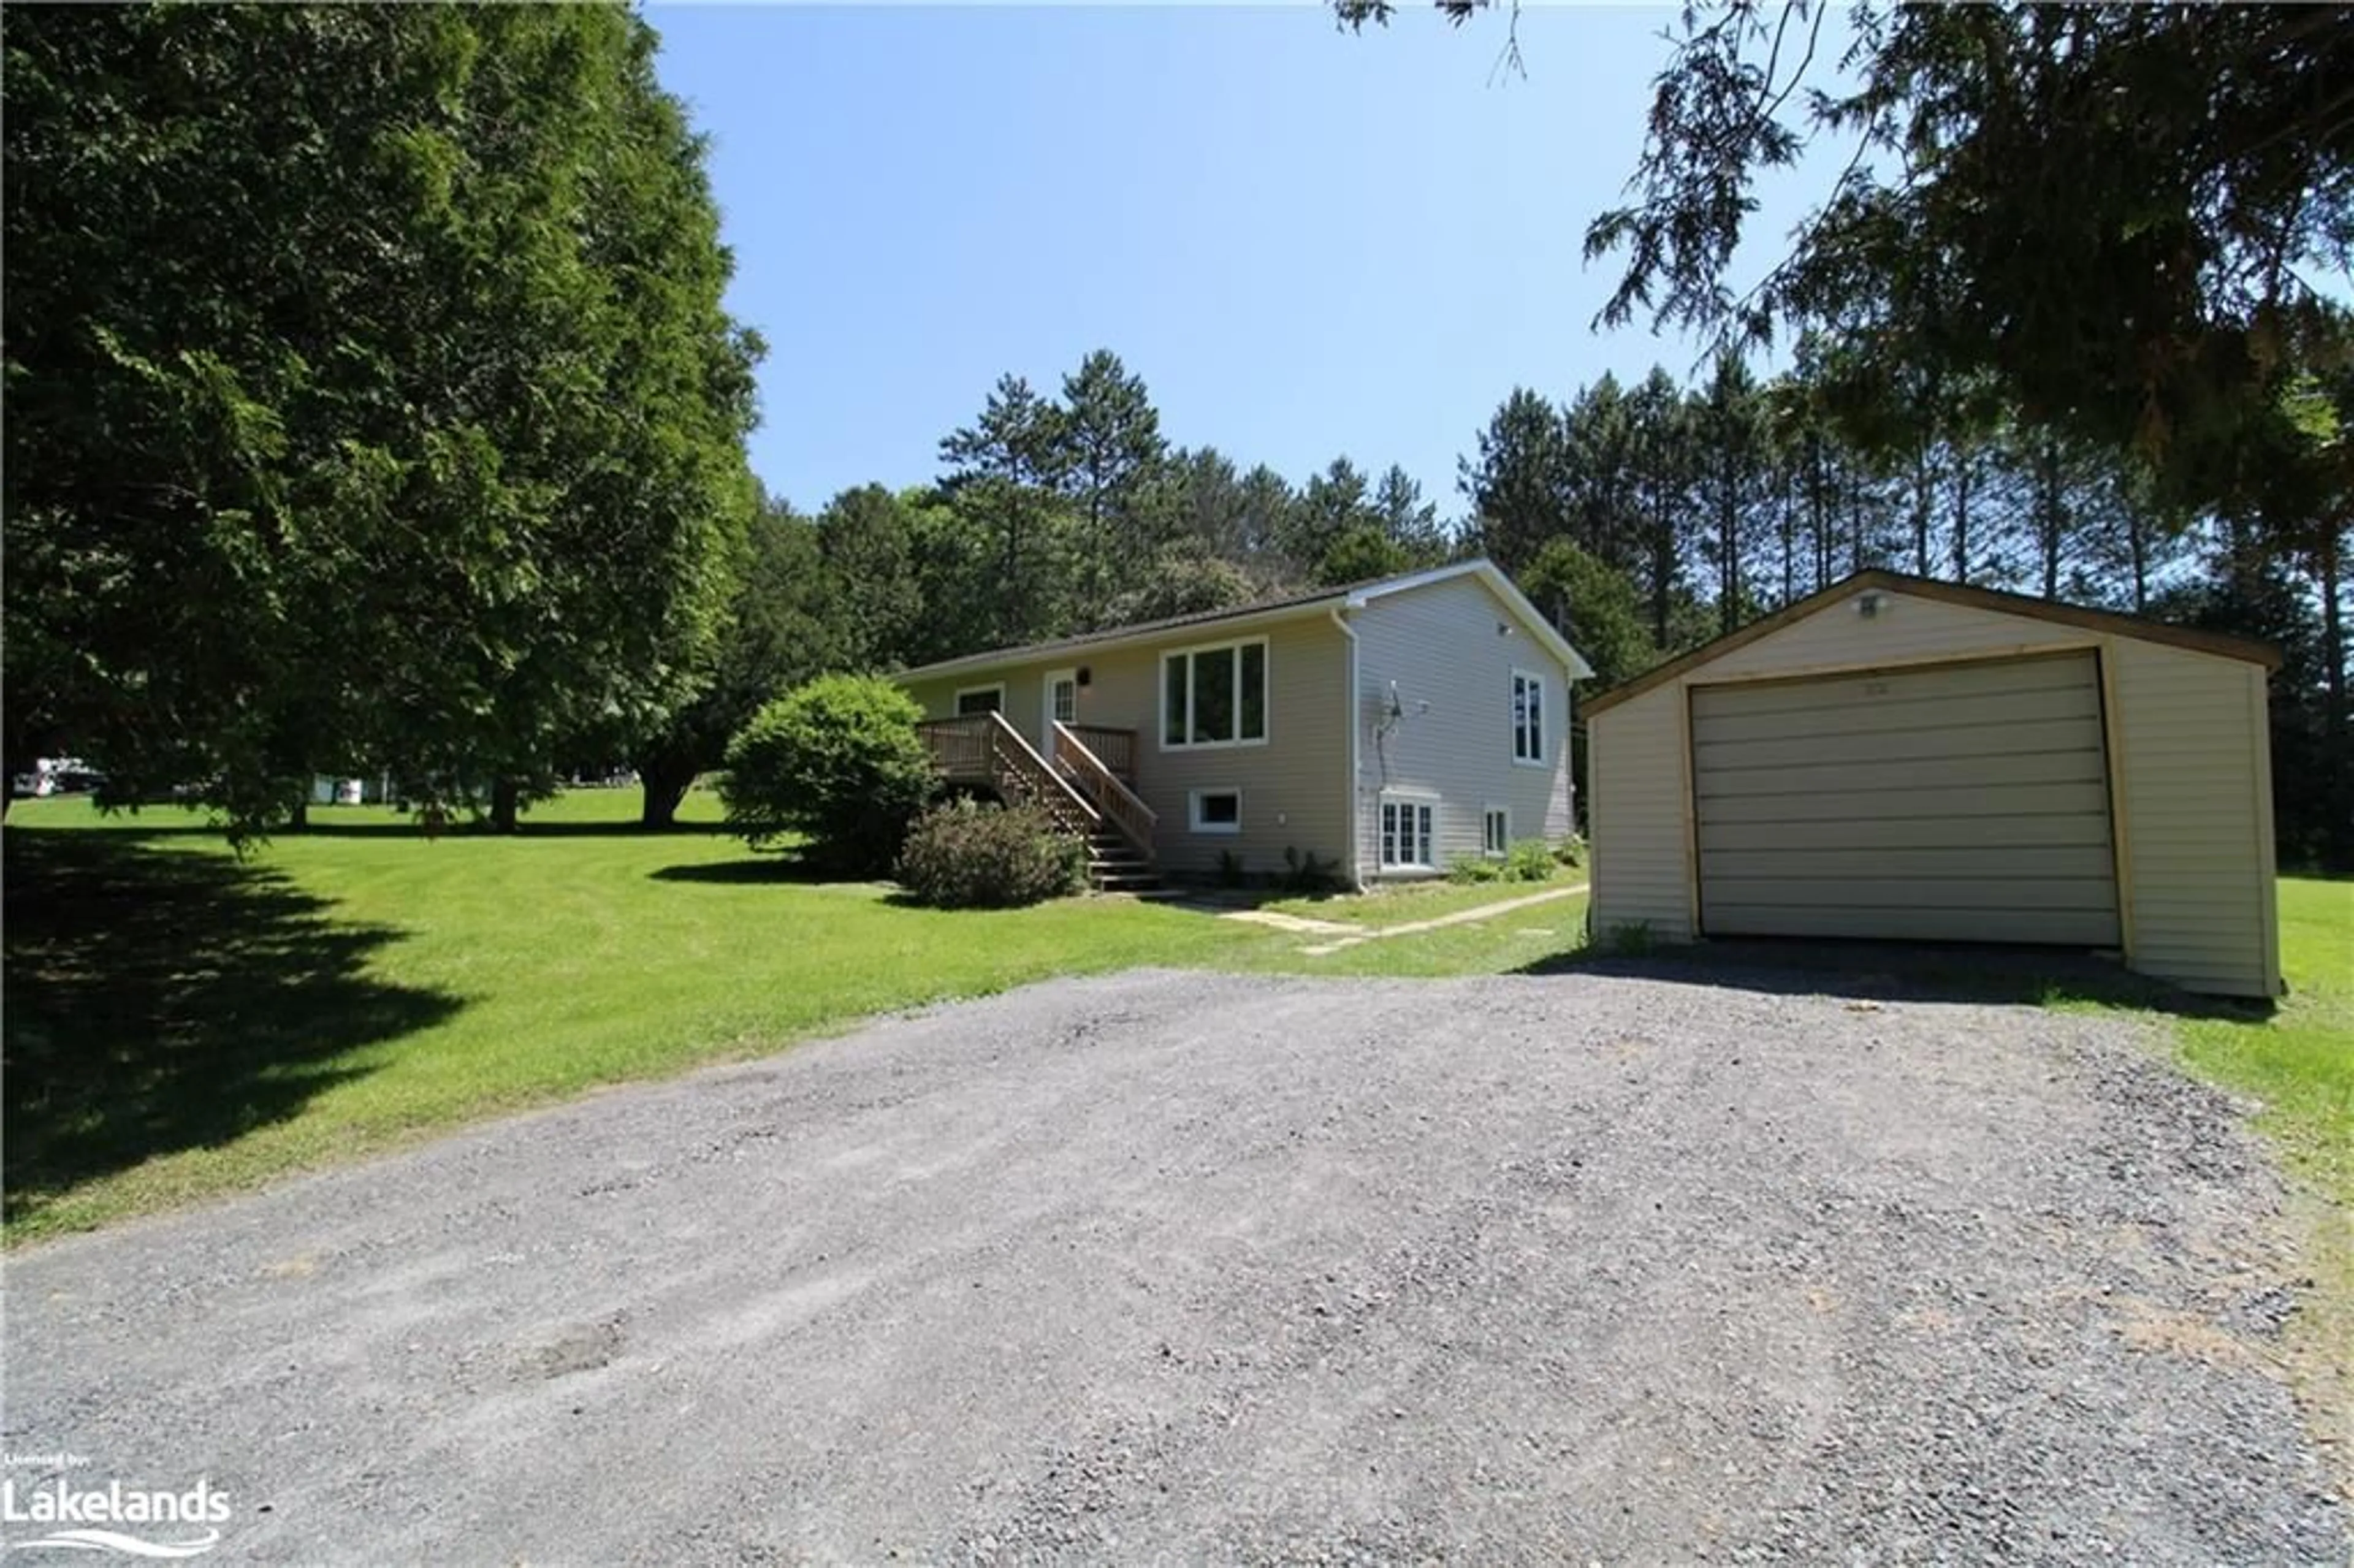 Cottage for 831 Old Muskoka Rd, Utterson Ontario P0B 1M0